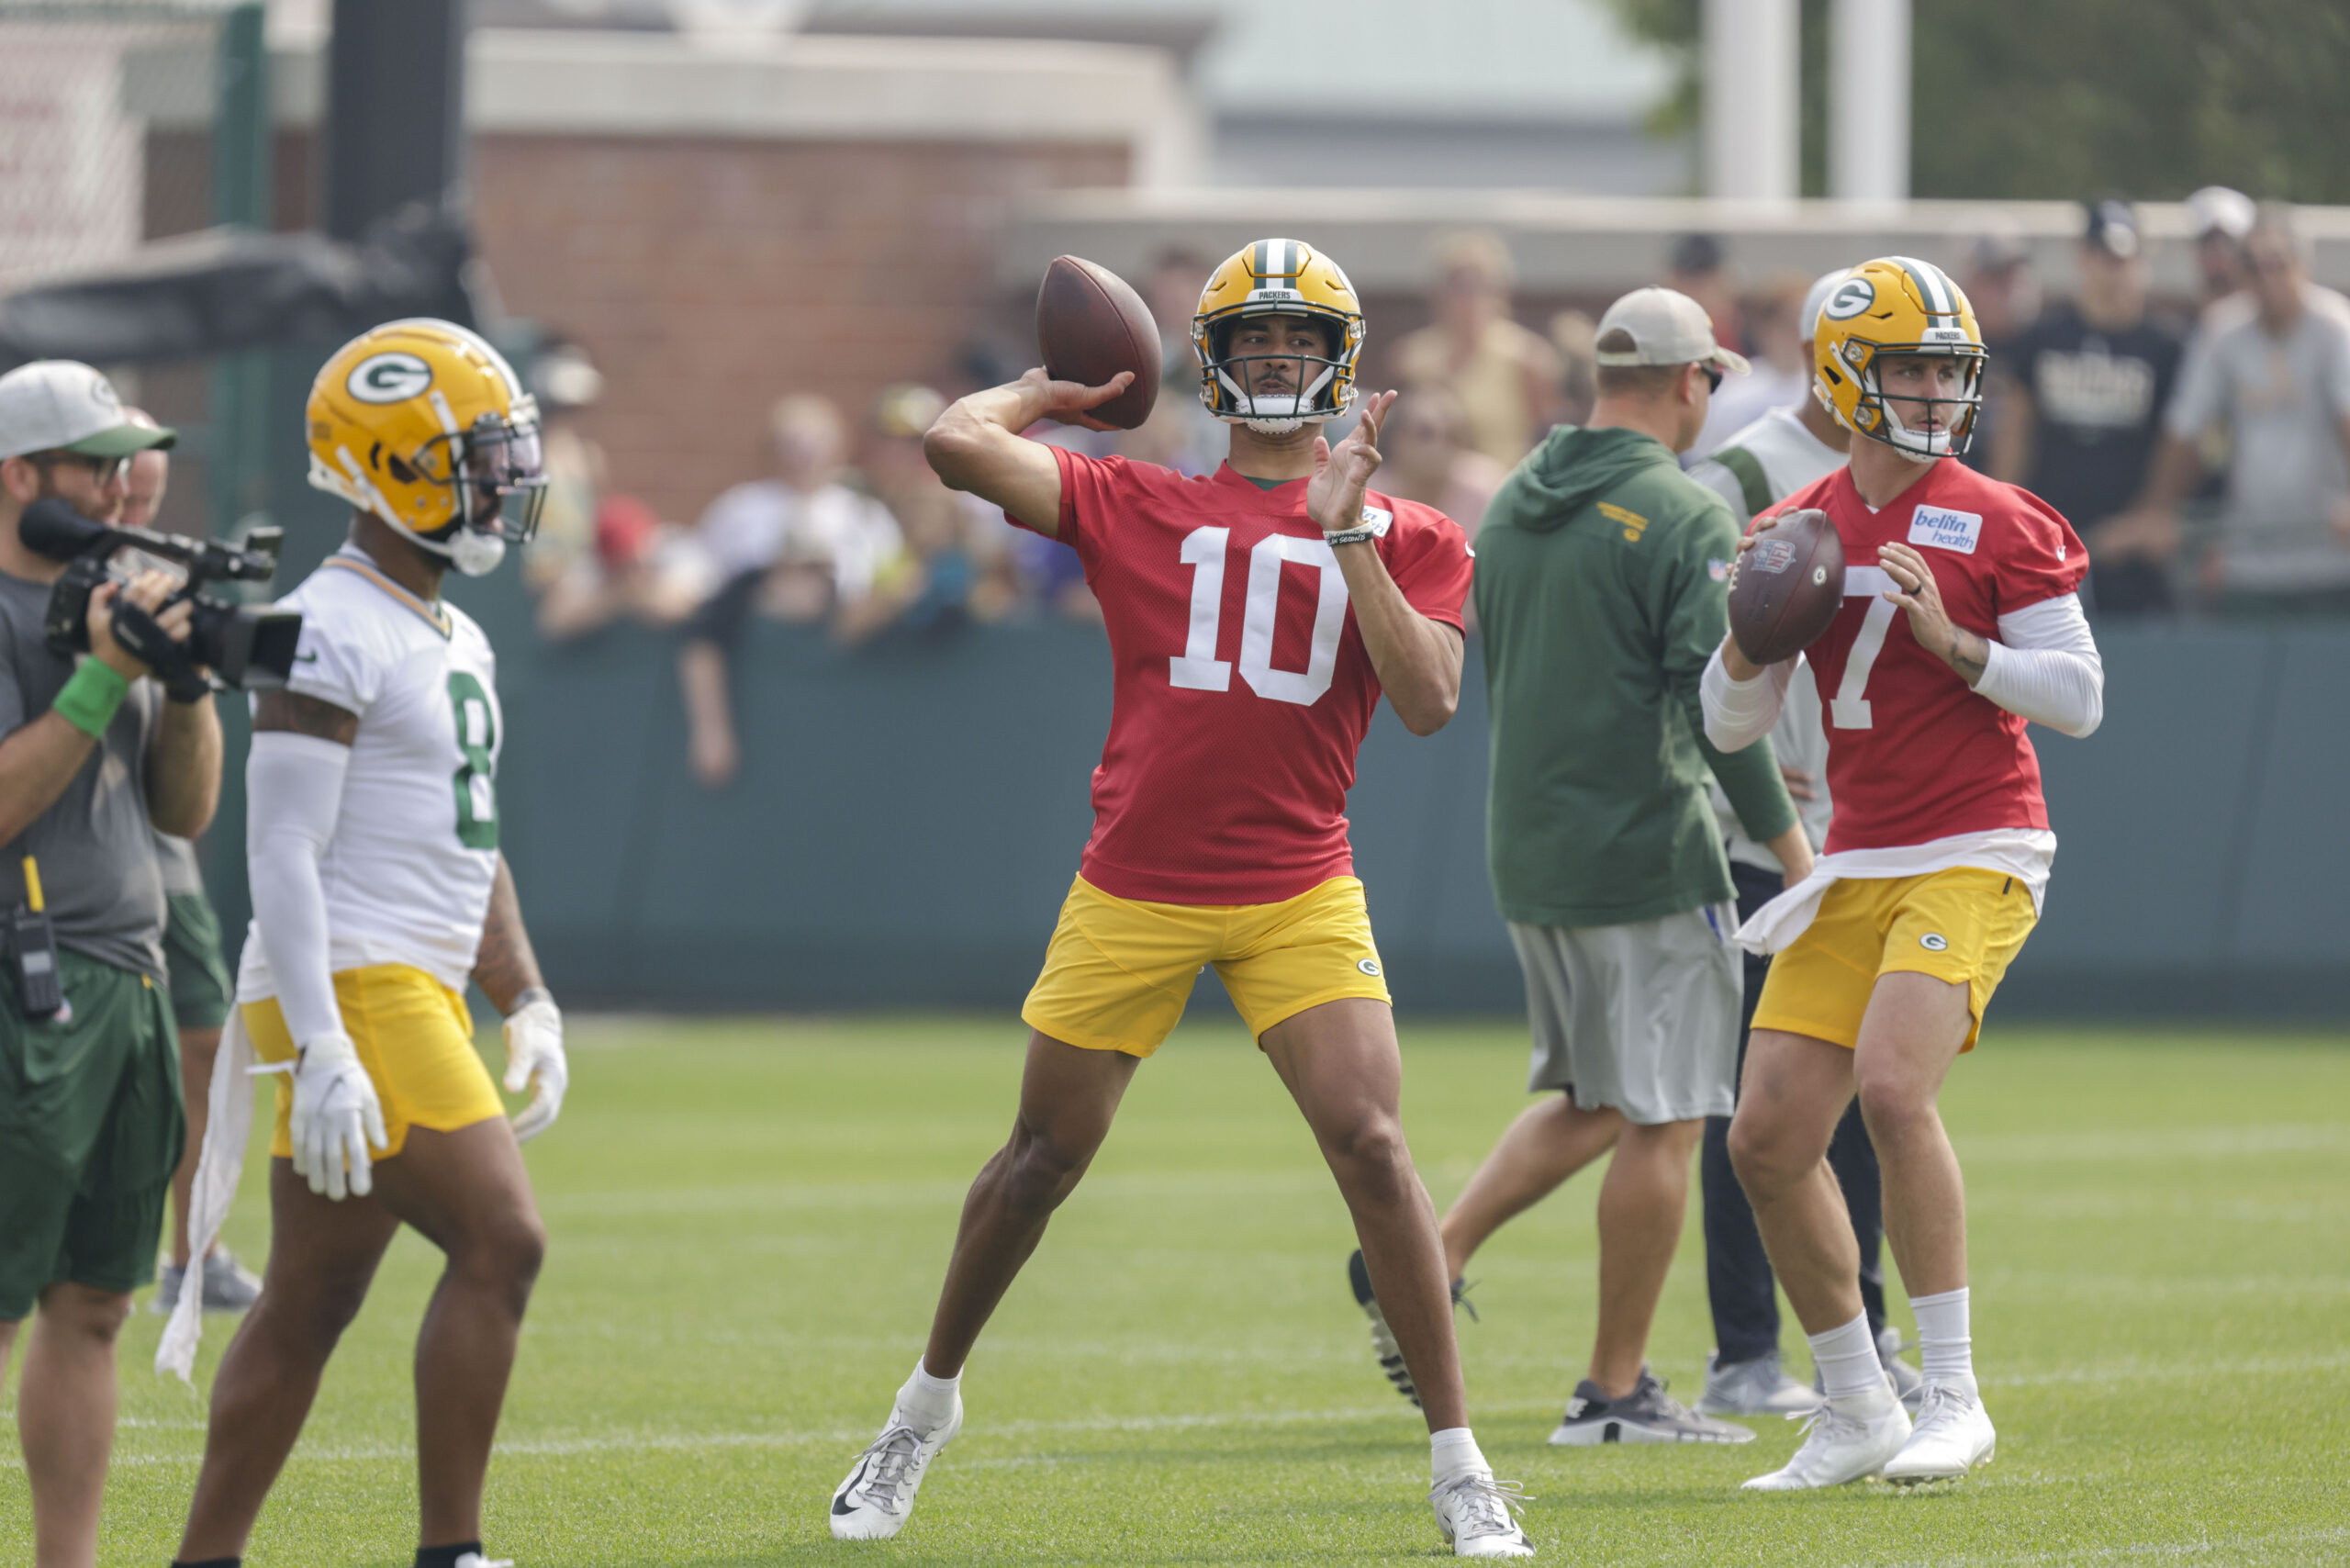 Jordan Love throws a pass at Packers training camp